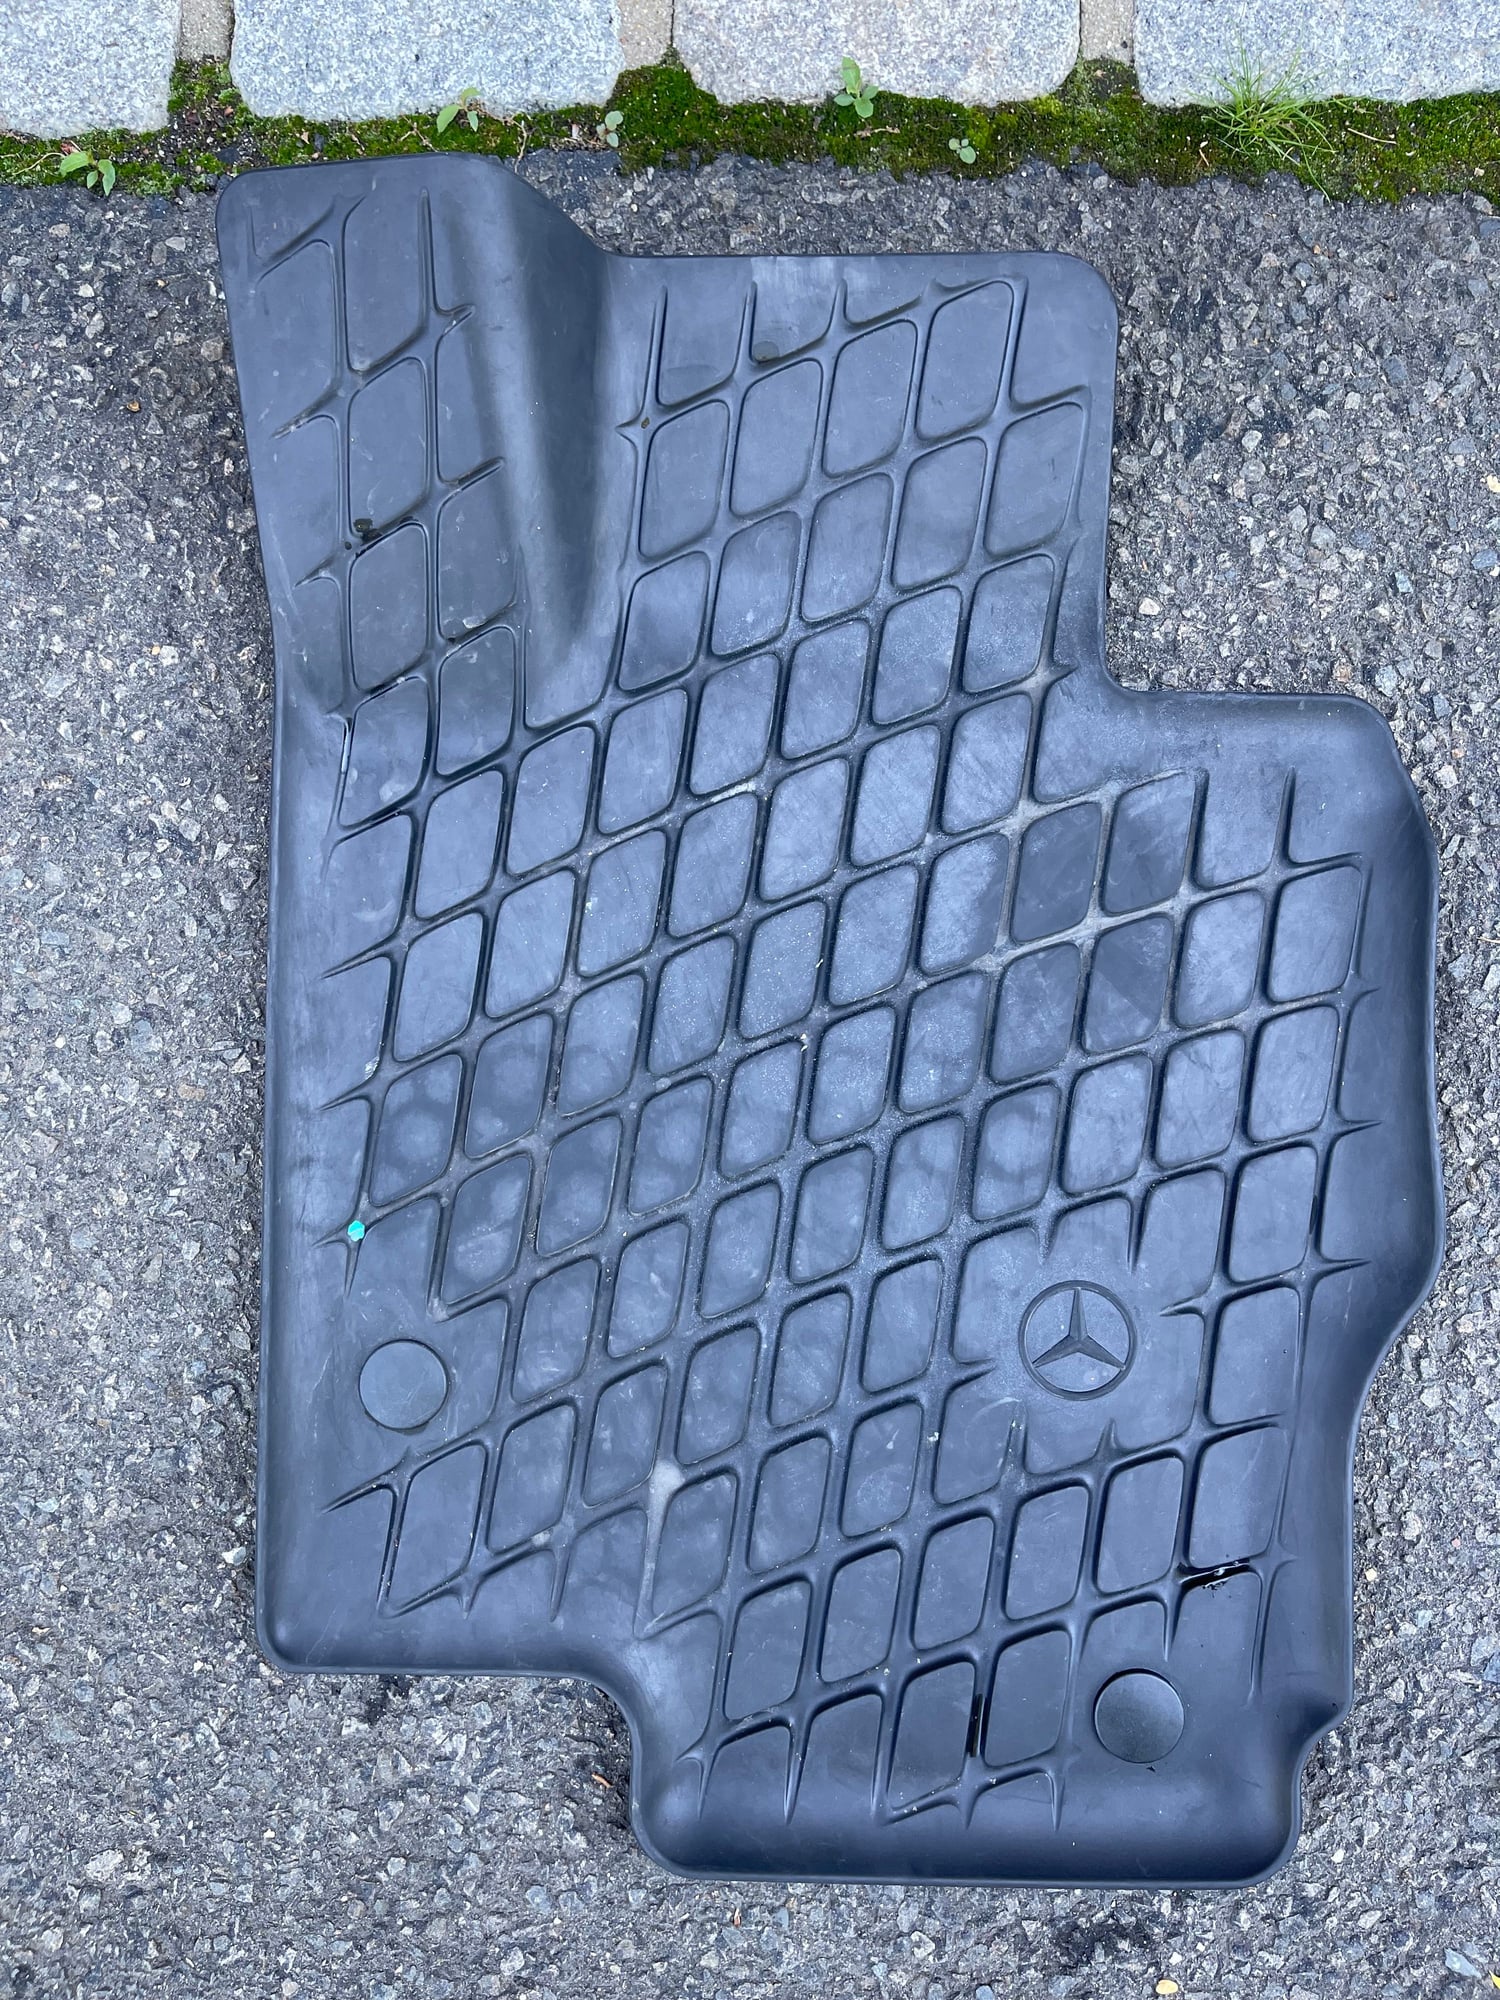 Interior/Upholstery - Mercedes OEM Floor mats - 2020+ GLS - Used - 2020 to 2023 Mercedes-Benz GLS450 - Wilton, CT 06897, United States